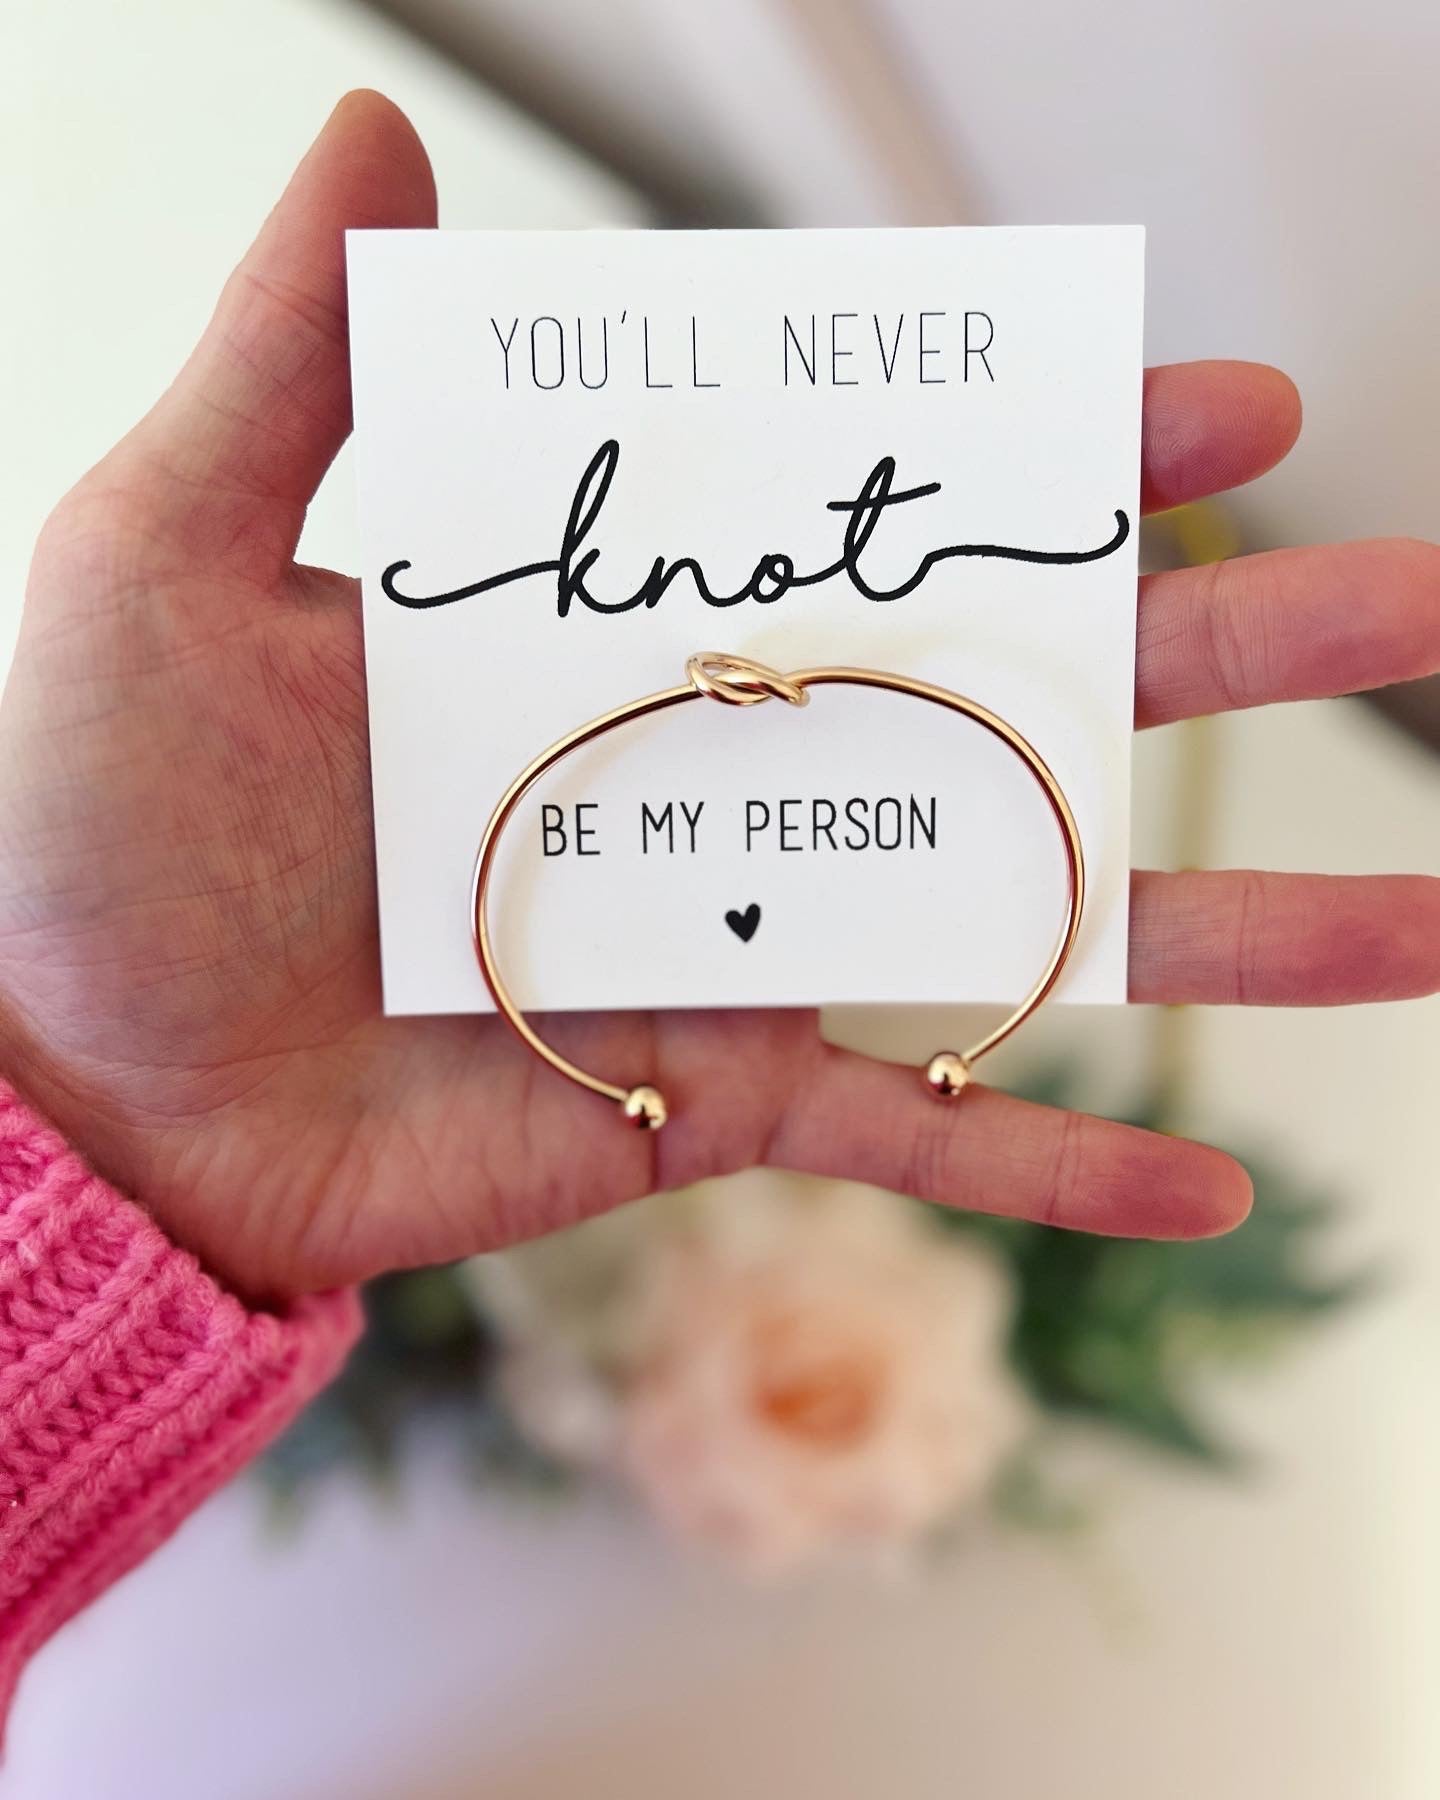 You'll never KNOT be my person knot bangle!